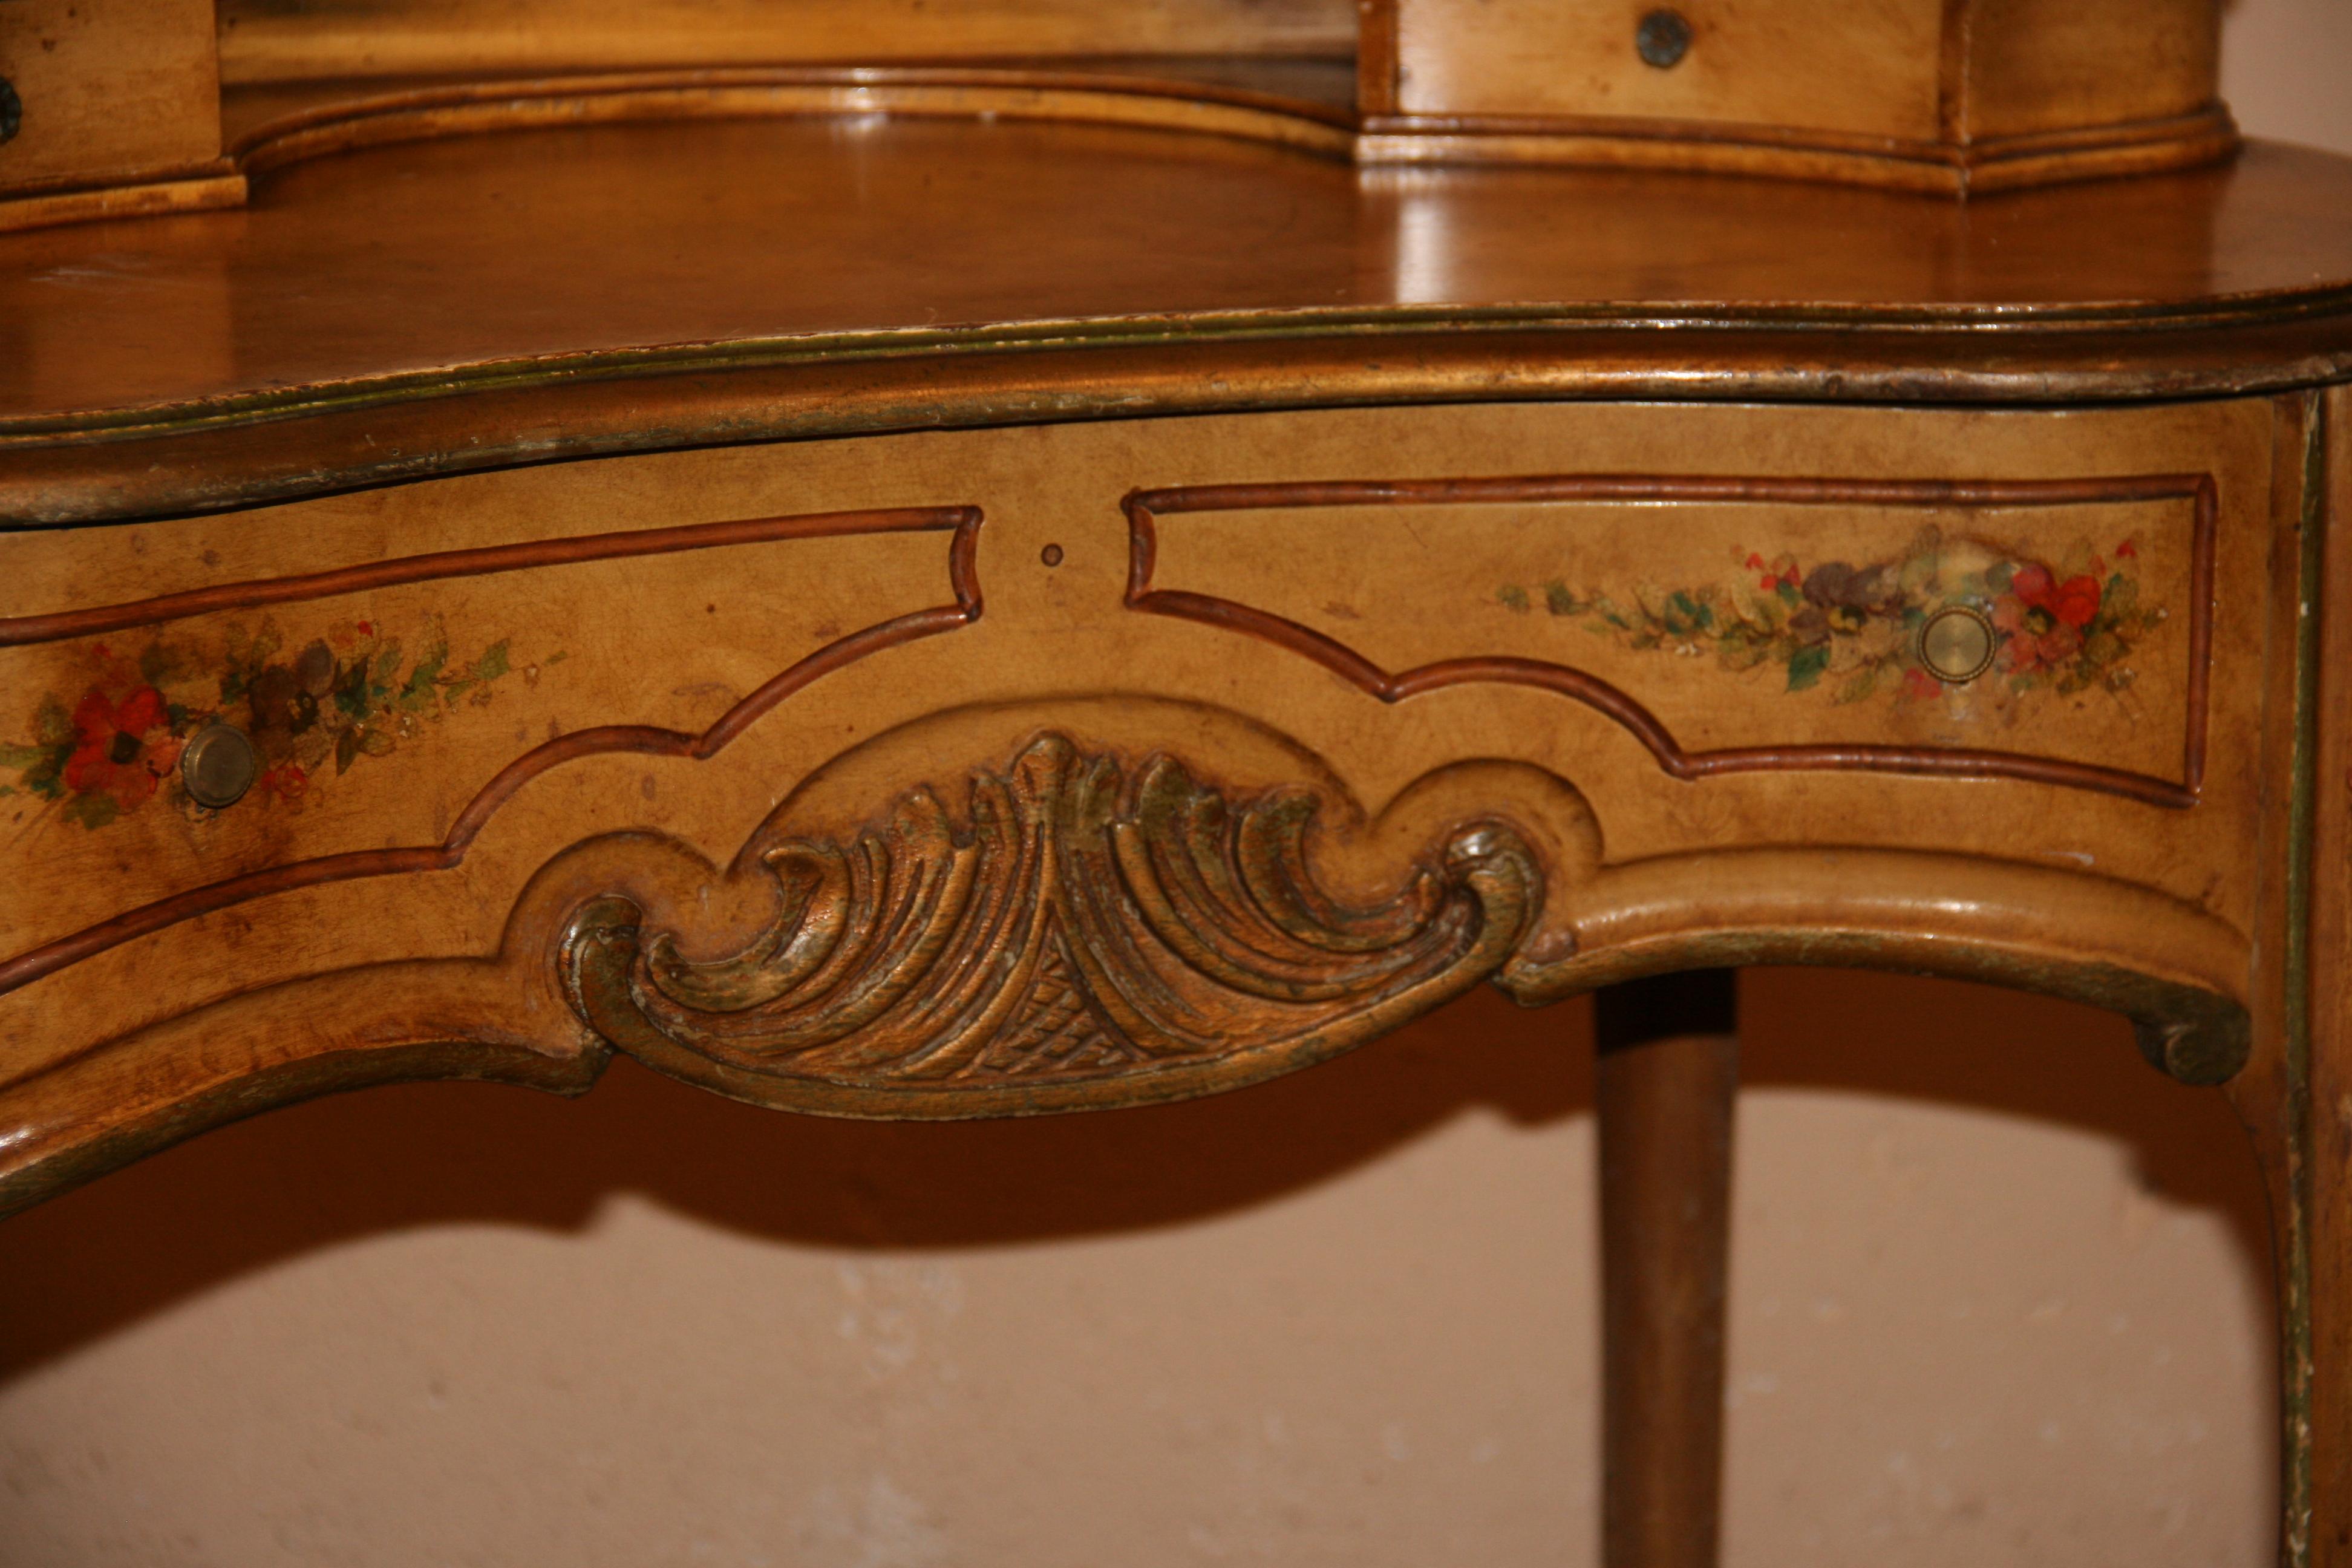 Early 20th Century French Kidney Shaped Hand Painted Desk and Chair 1920's For Sale